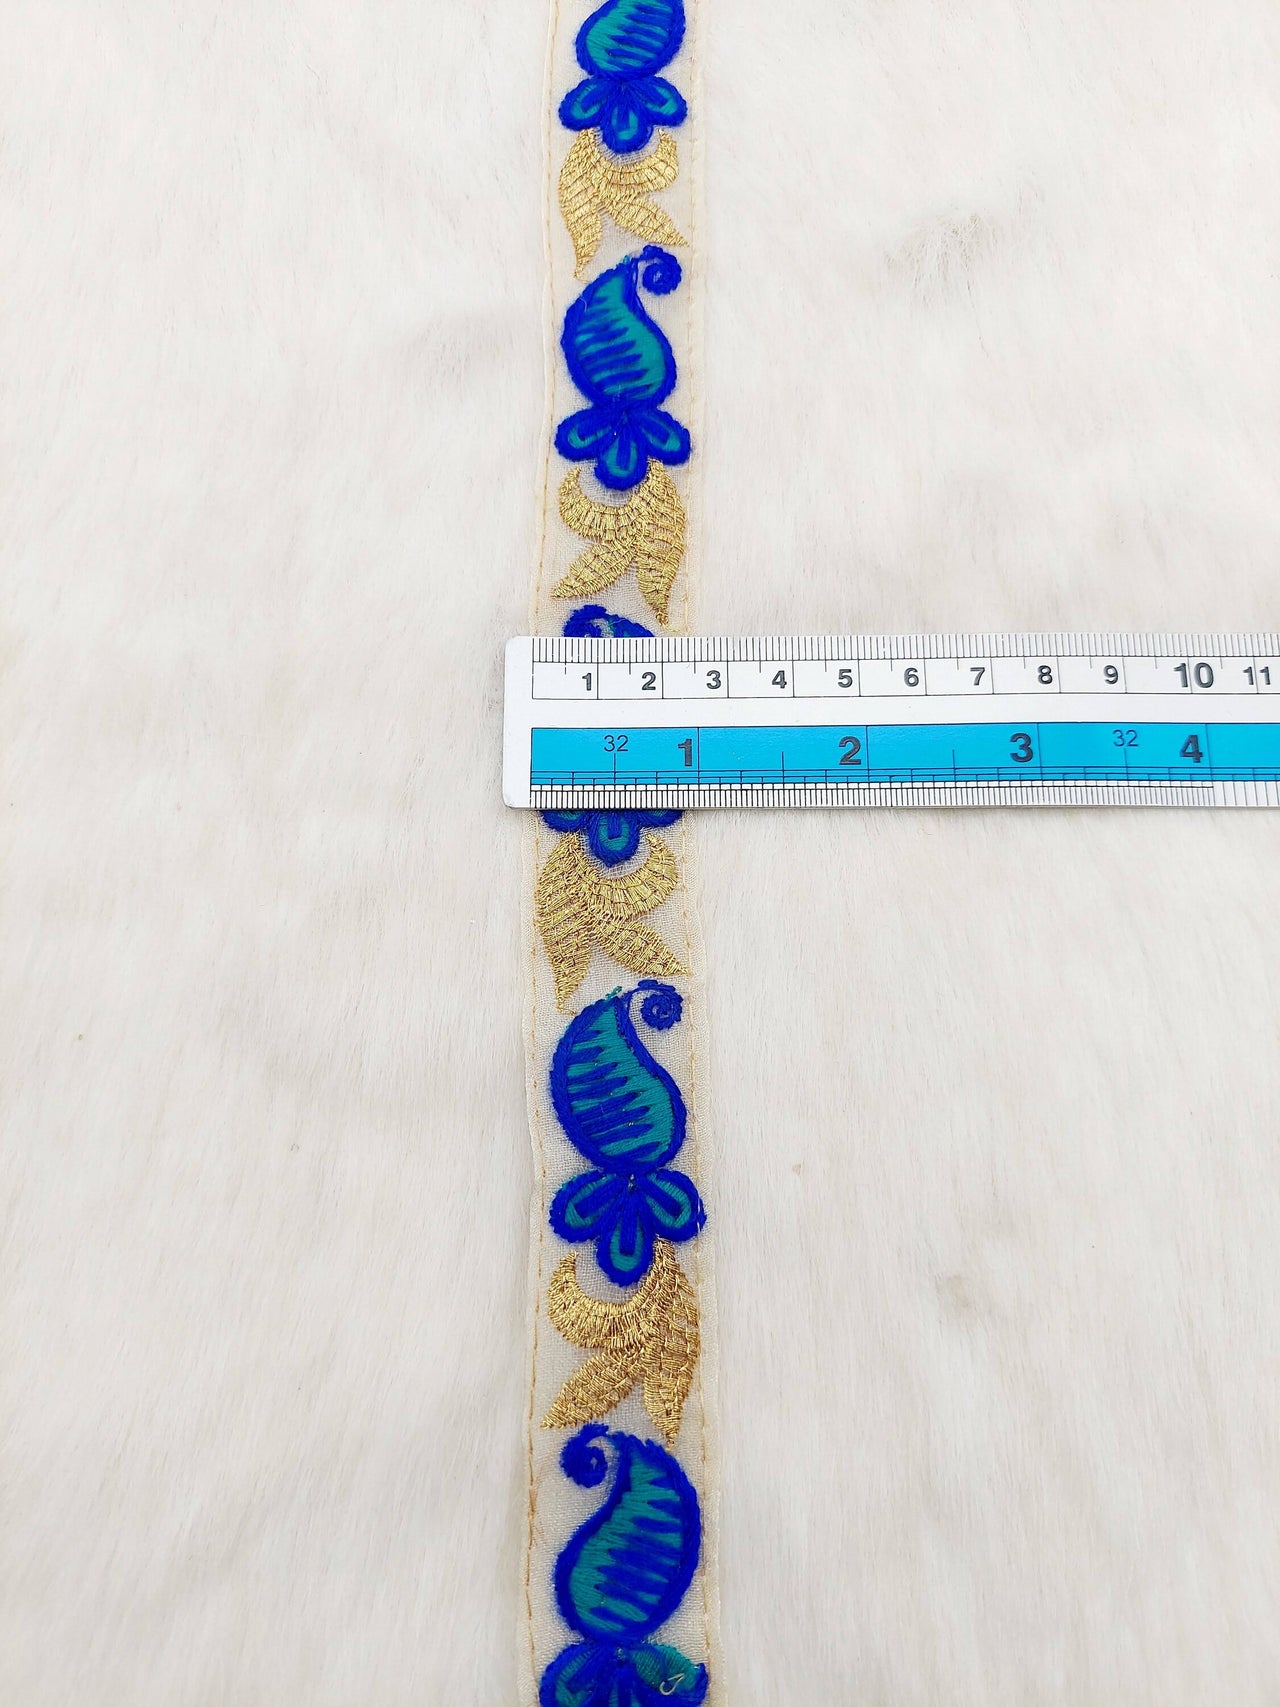 Beige Tissue Fabric Trim With Blue and Gold Embroidery, Paisley Embroidery, Trim by 2 Yards